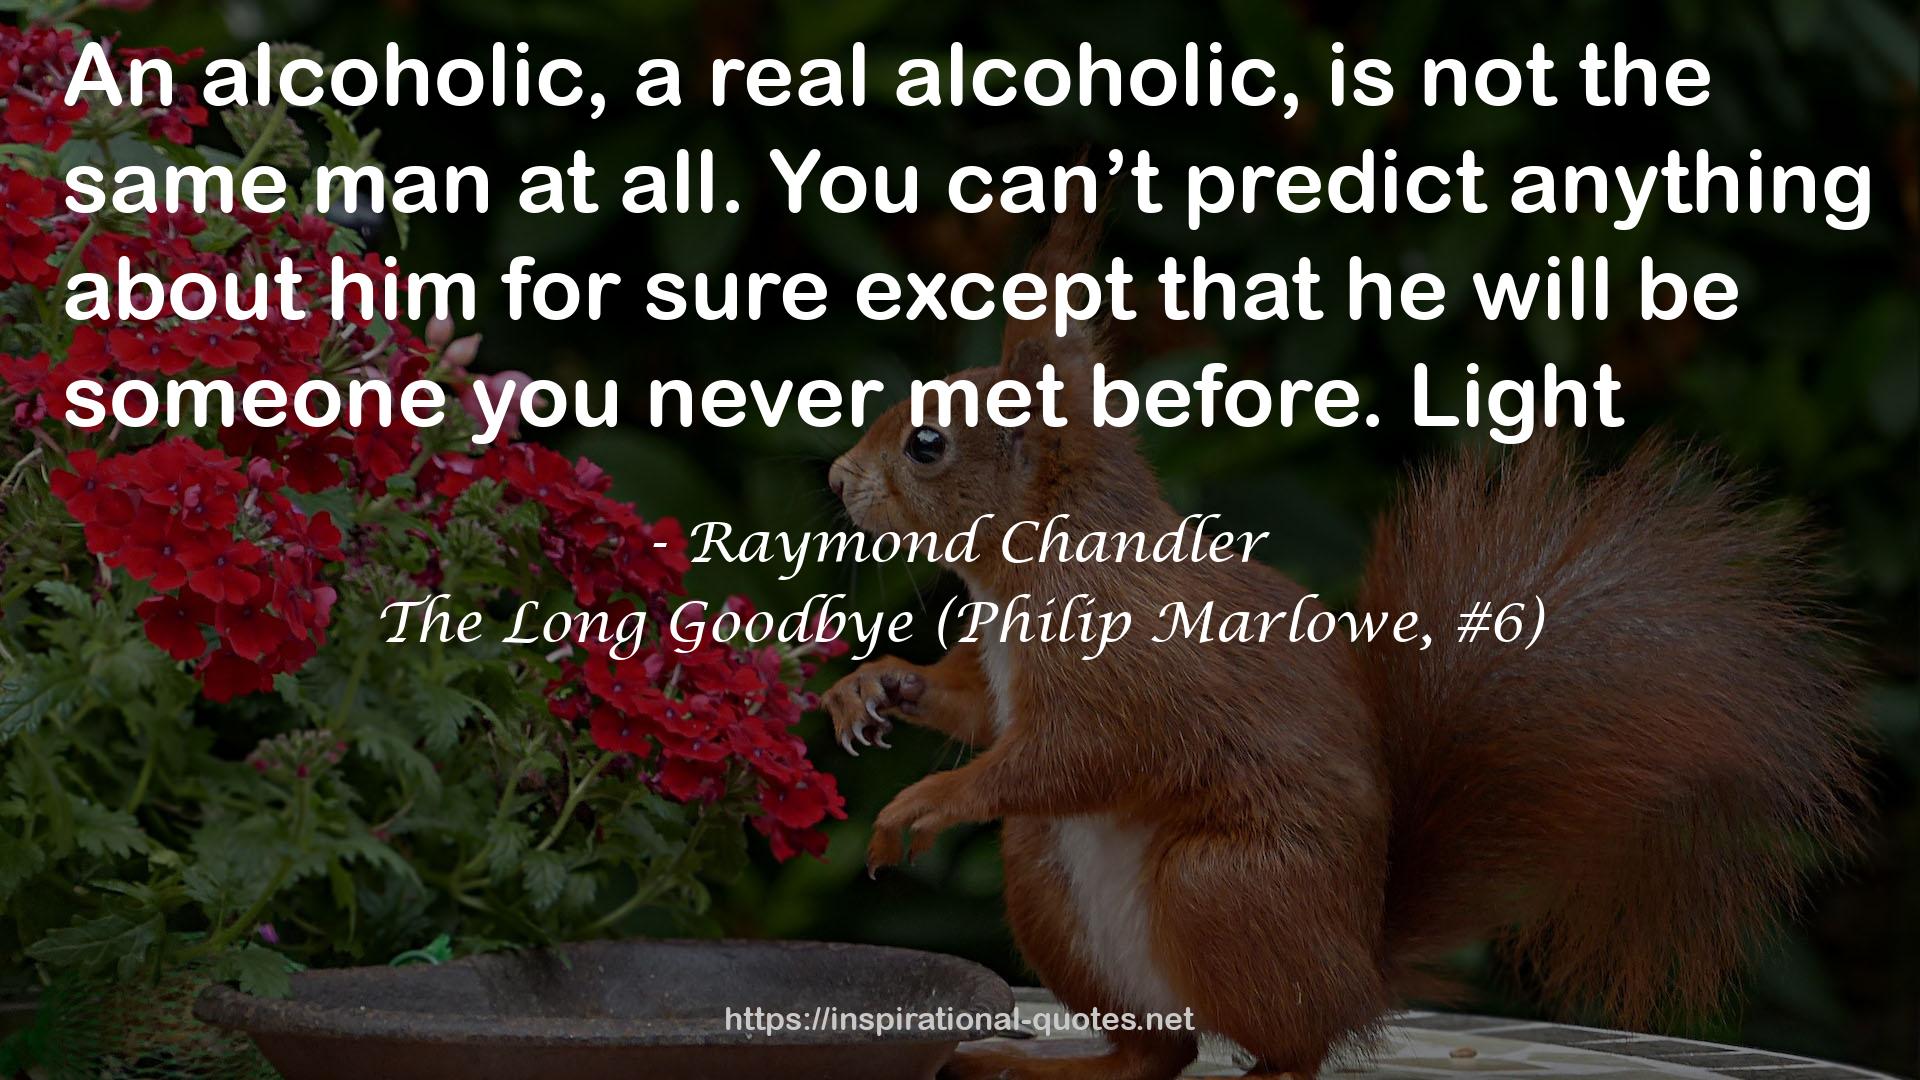 The Long Goodbye (Philip Marlowe, #6) QUOTES